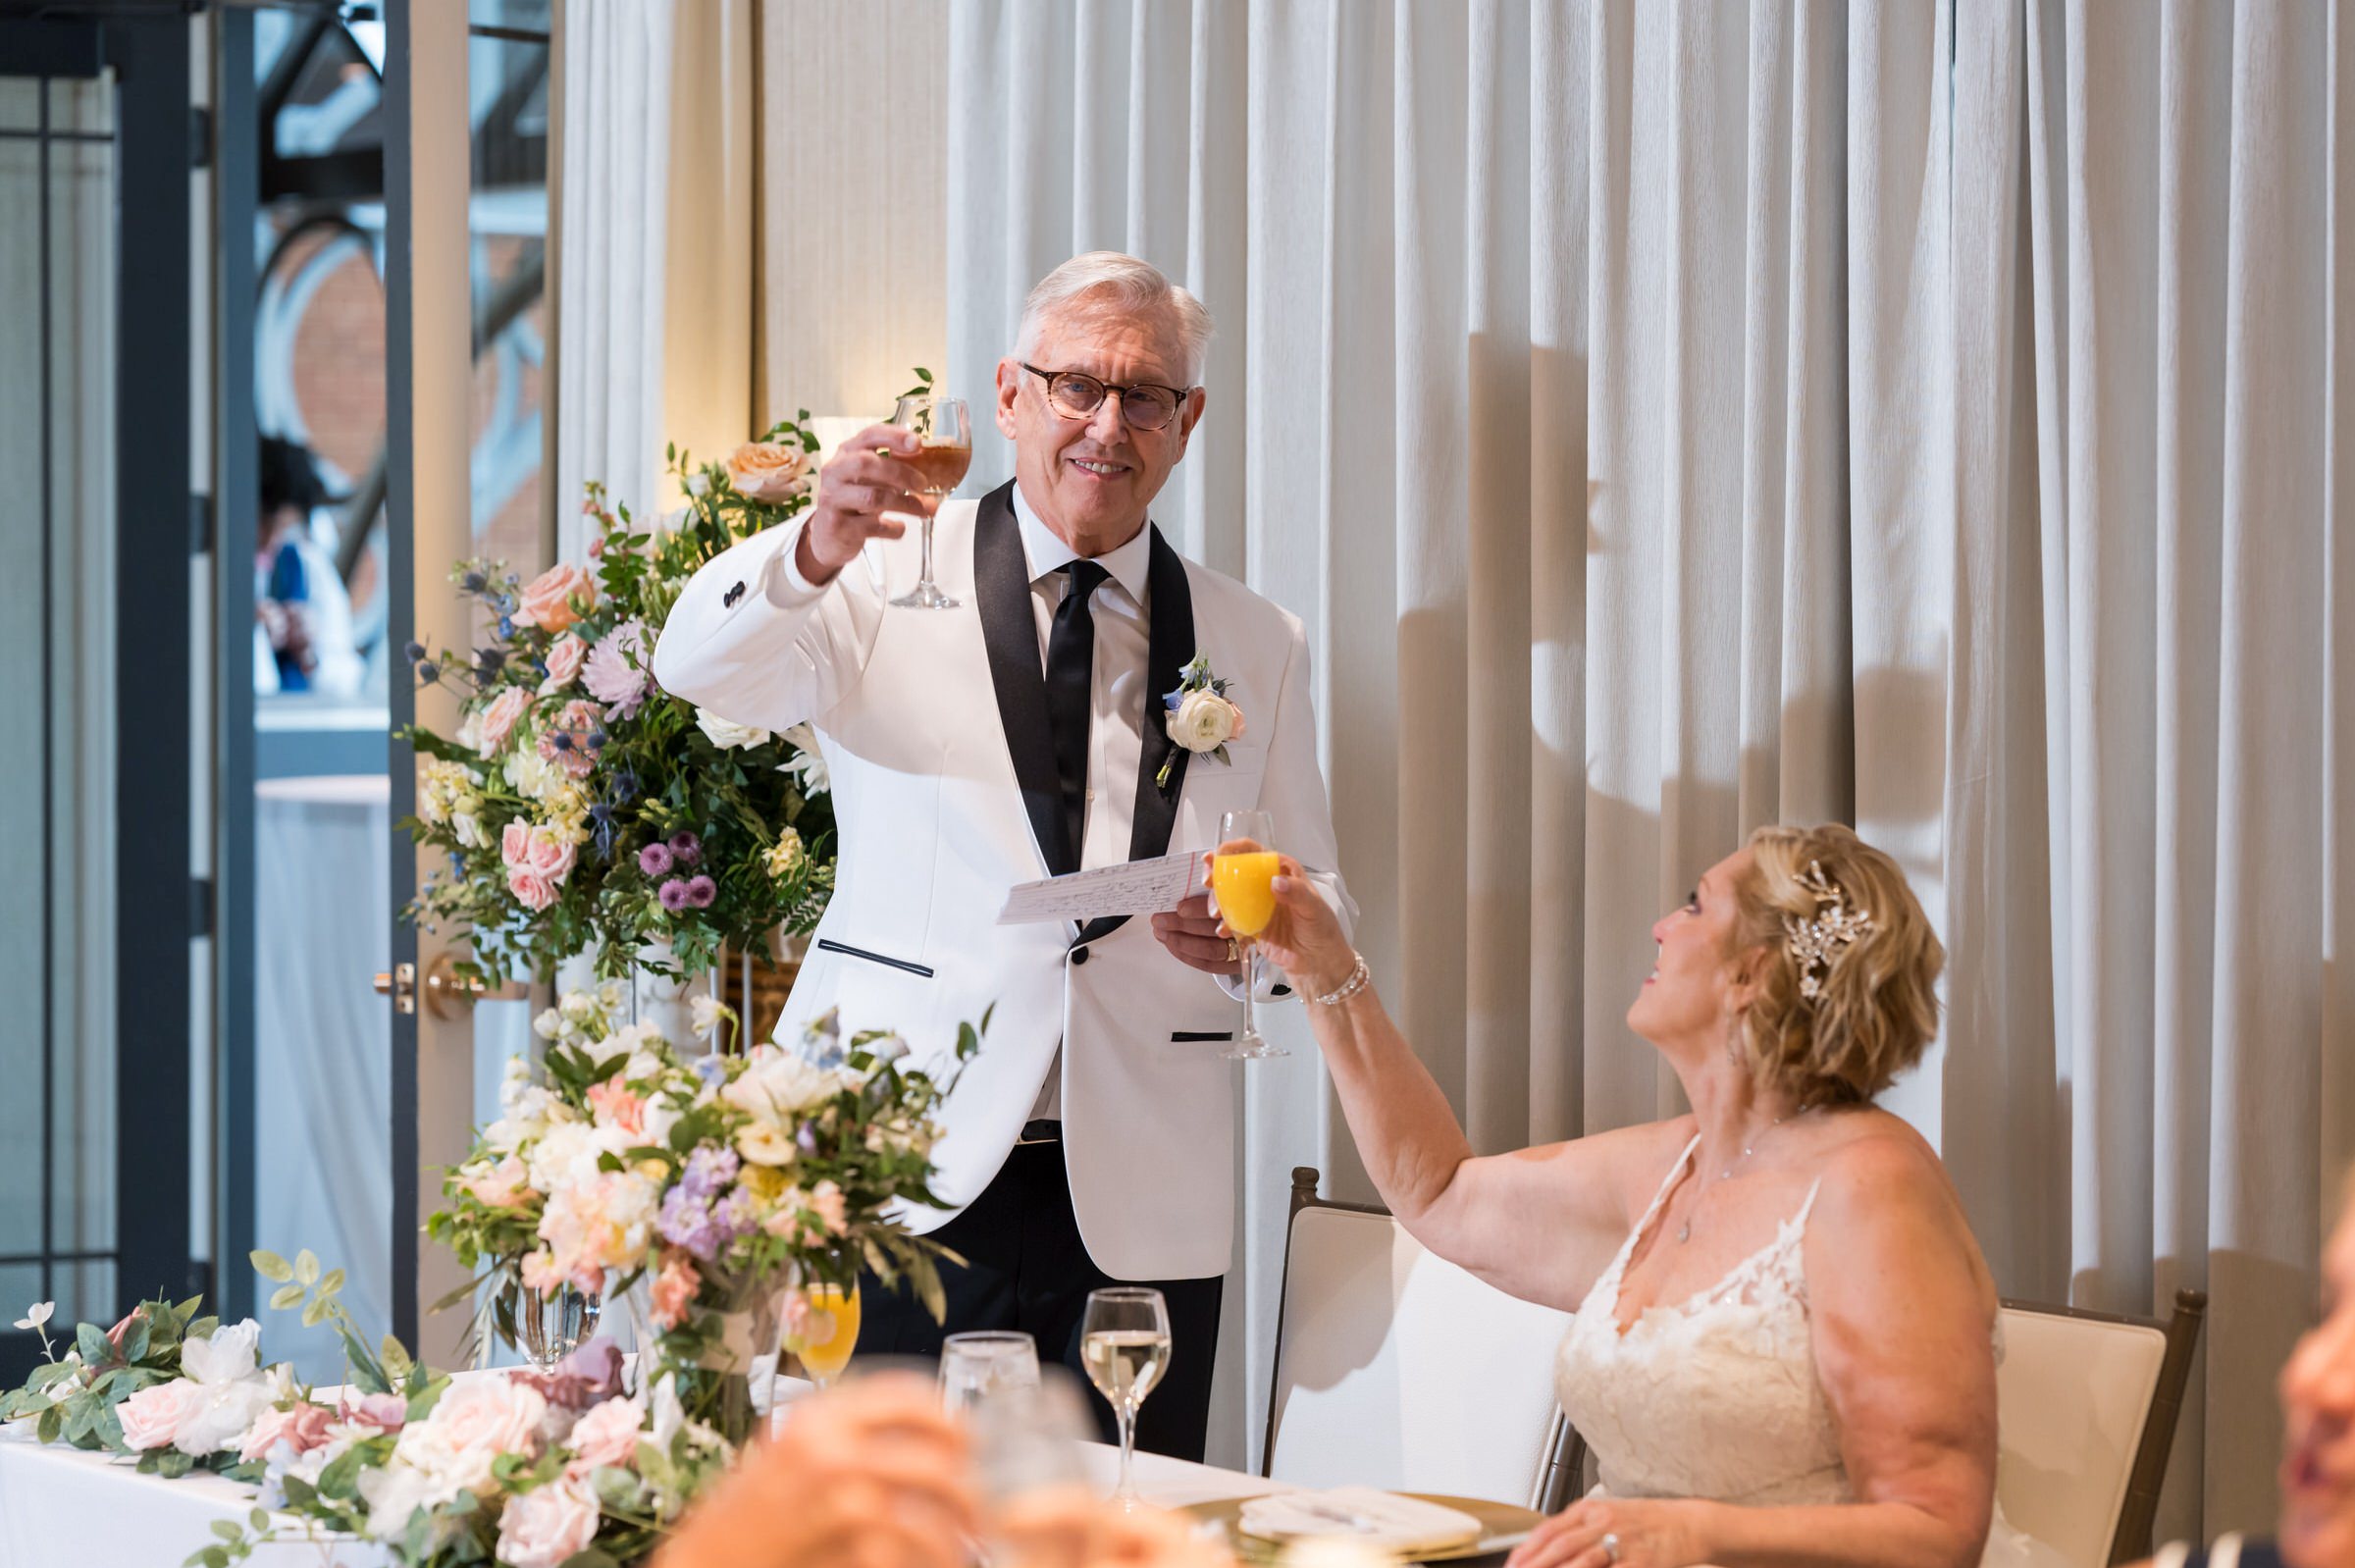 A groom toasts his bride in the Abbey at their private wedding at St. John's Resort.